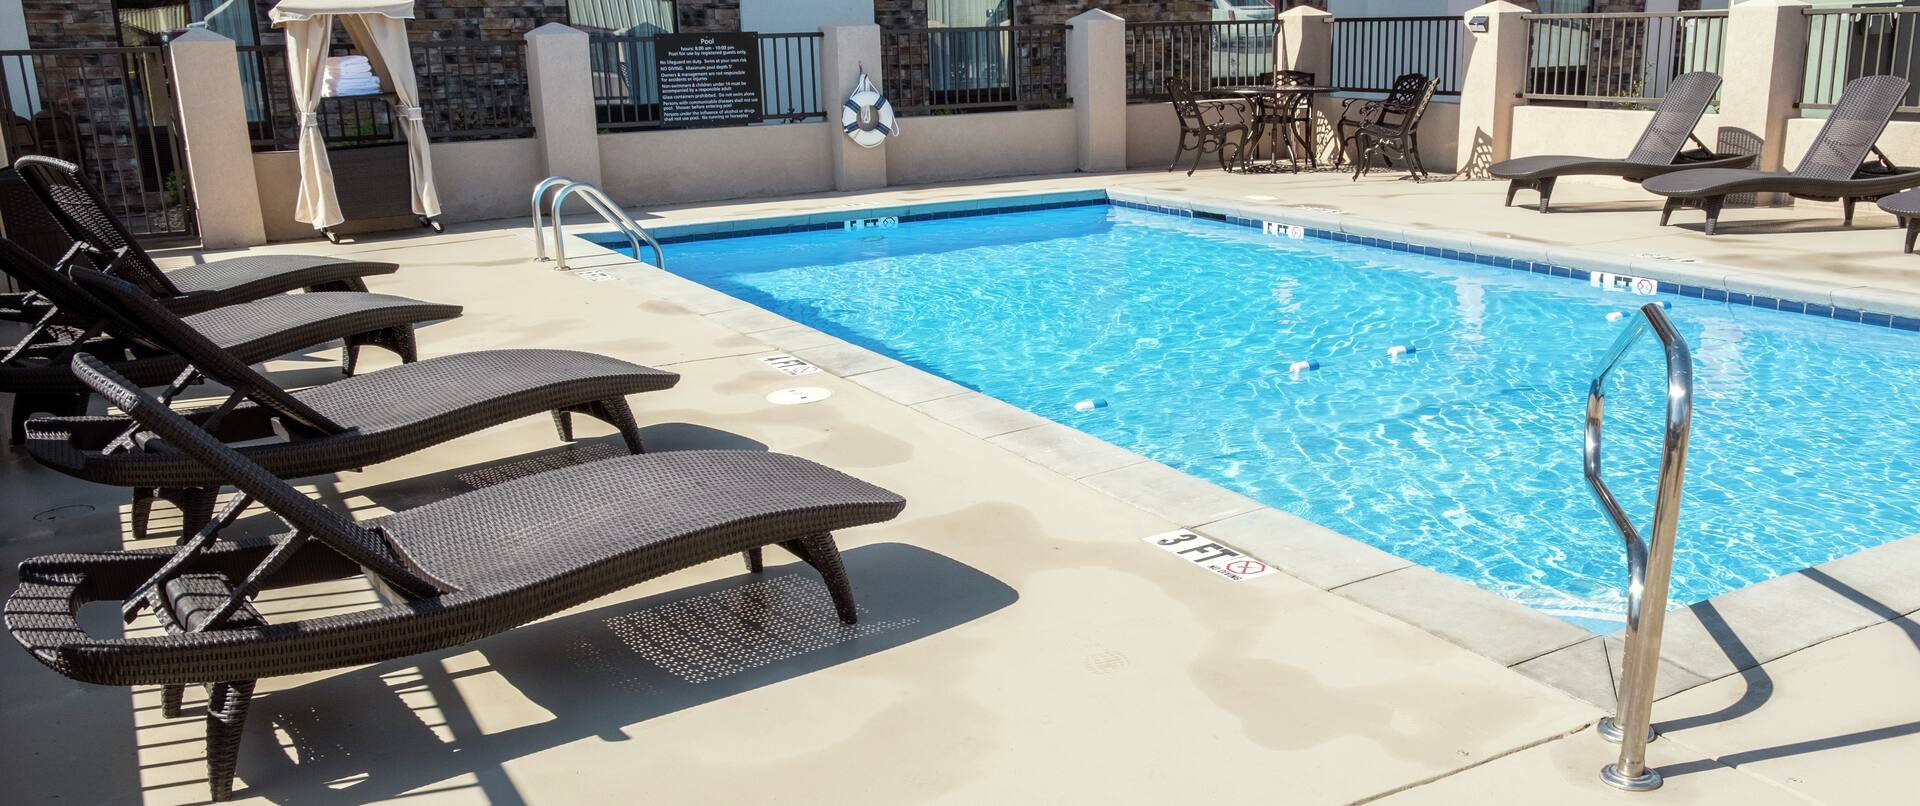 Outdoor Pool with Deck Seating